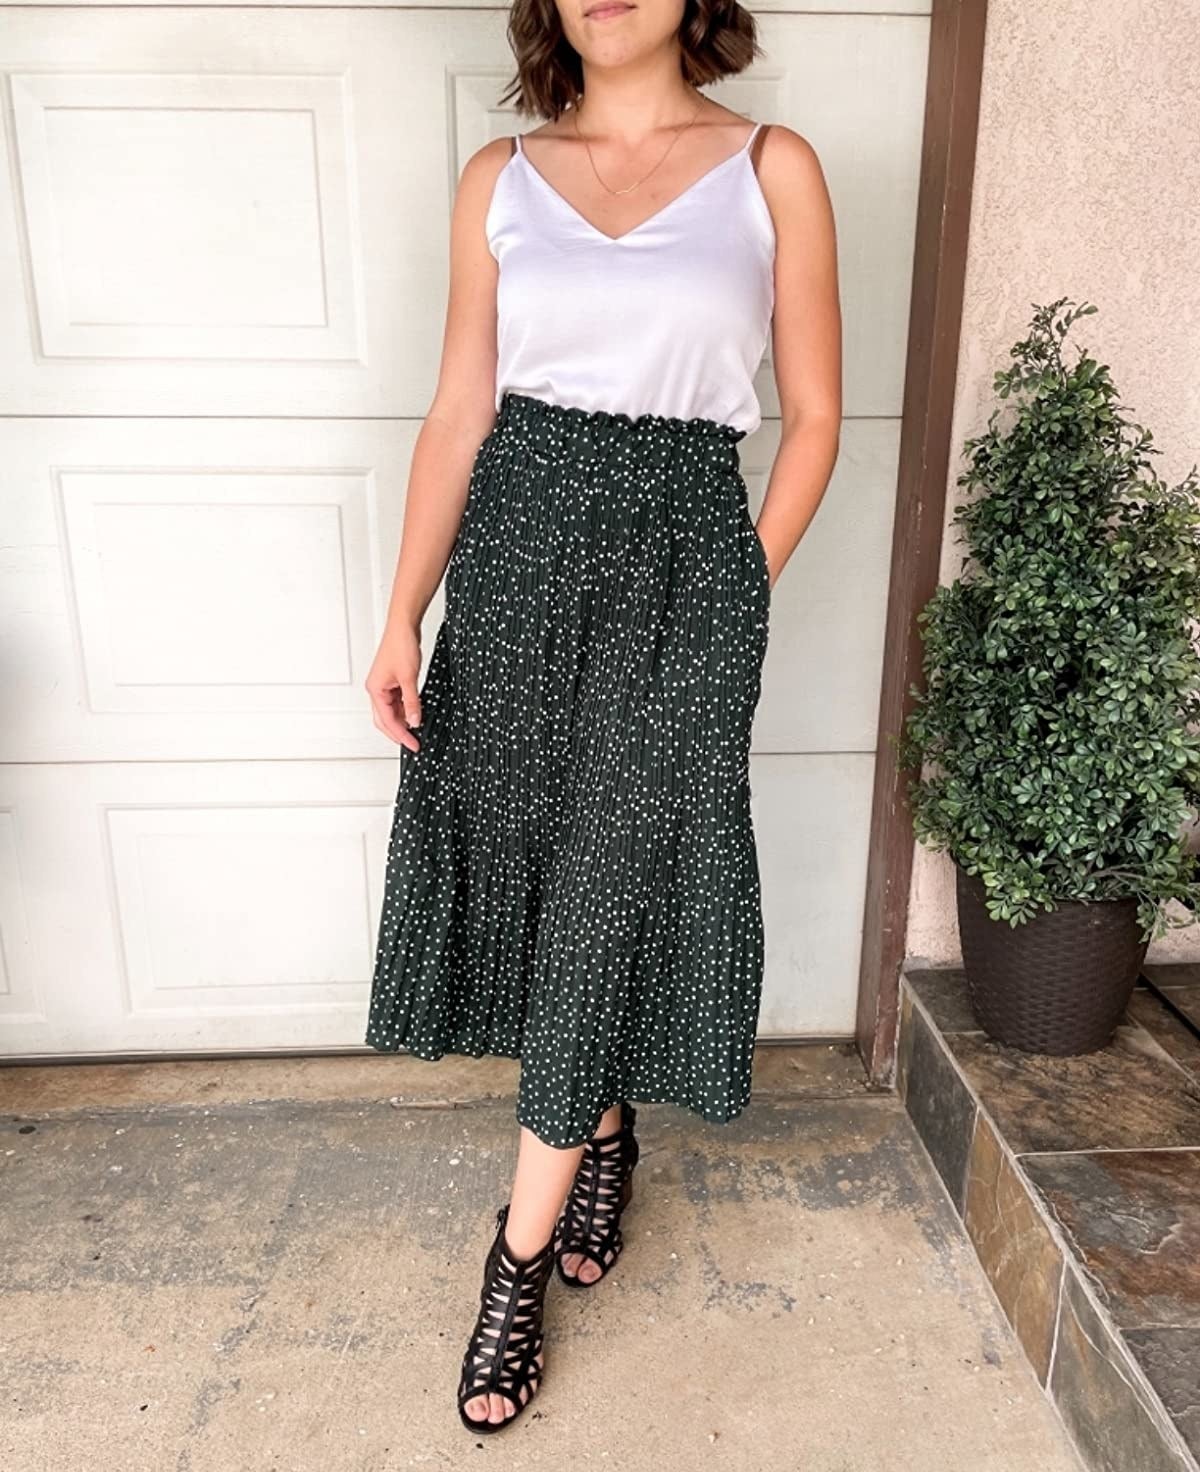 Reviewer wearing dark green polka dot skirt with black sandals and white tank top